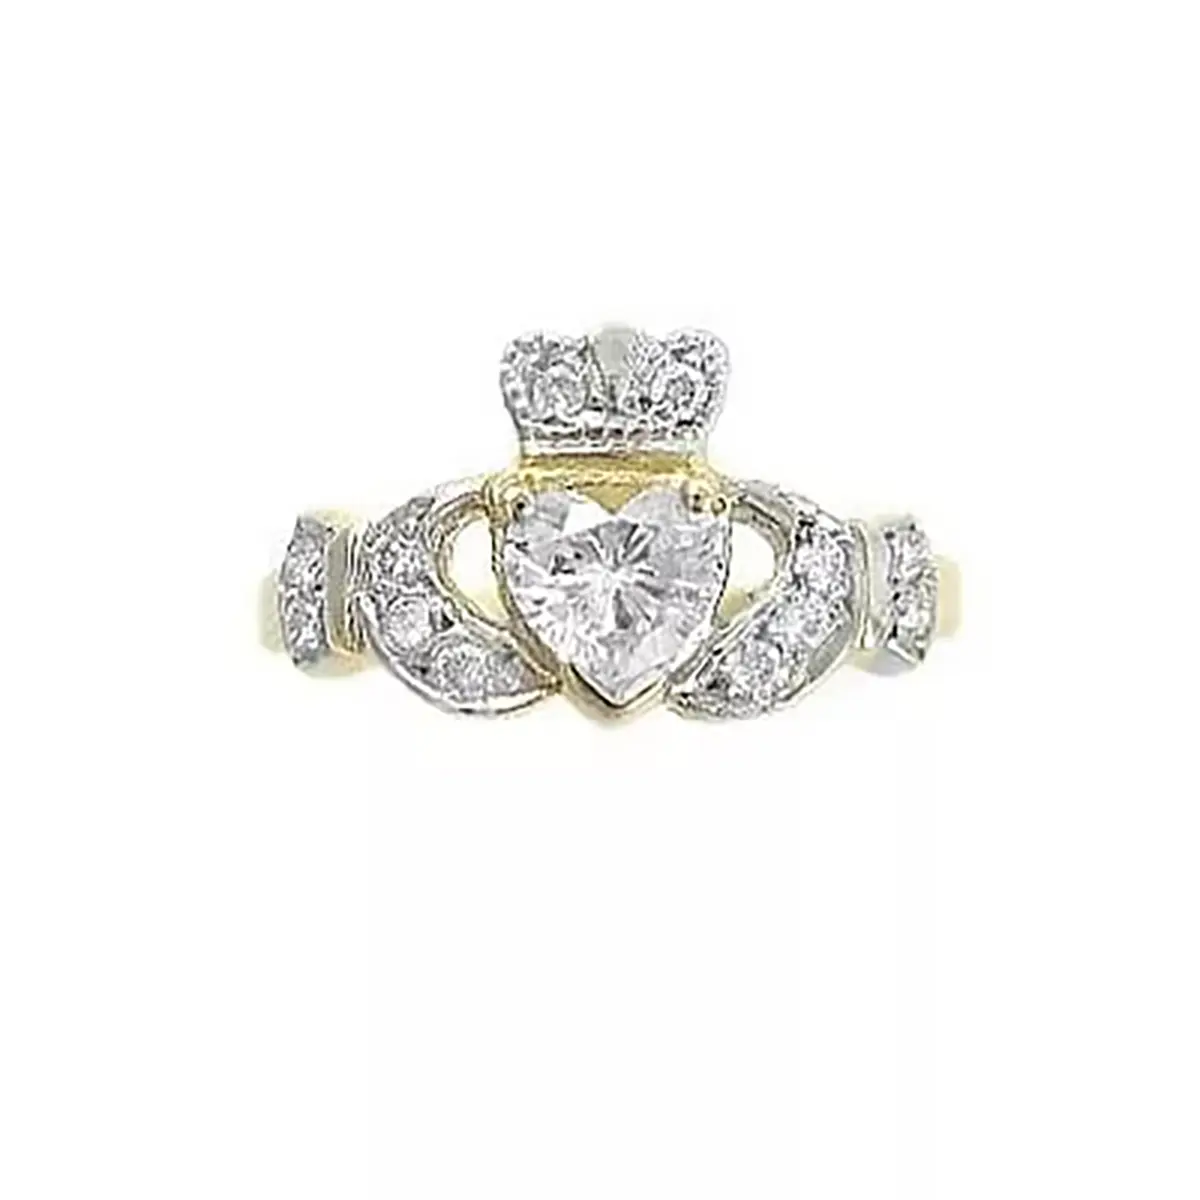 1_aYellow Gold Heart Diamond Encrusted Claddagh Engagement Ring...